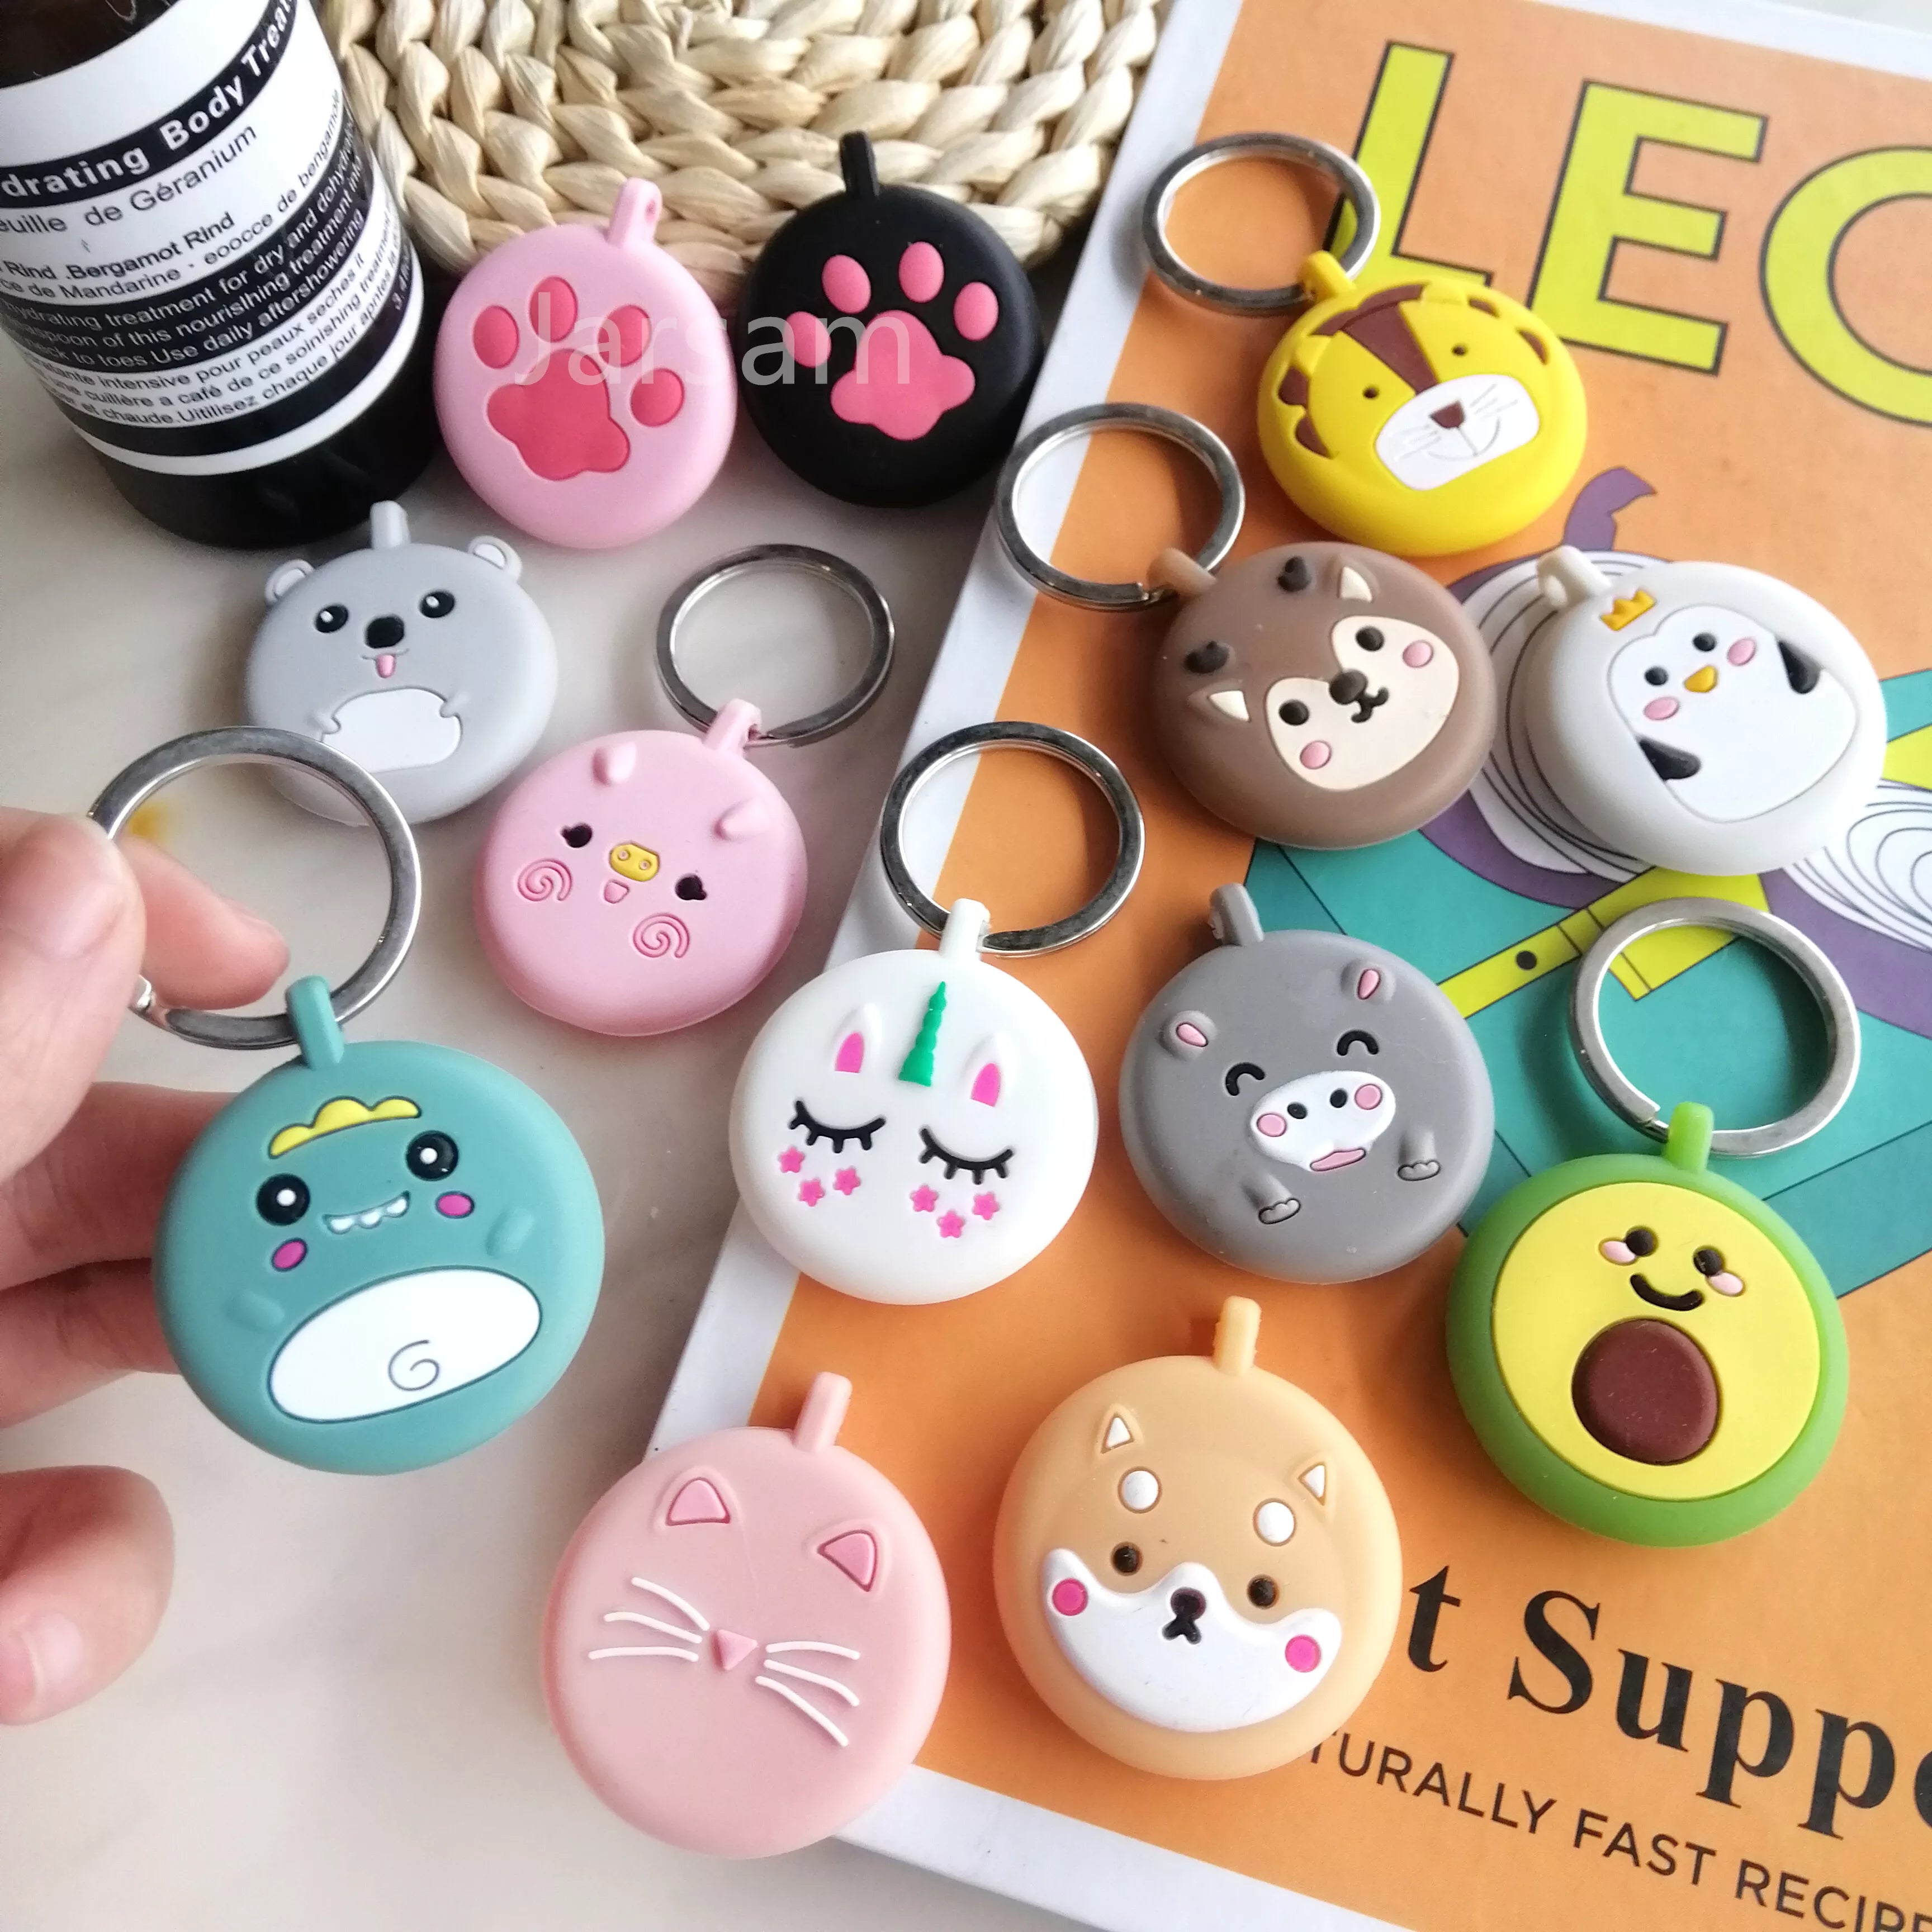 Smart Accessories Silicone Soft Protective For AirTag Keychain Pet Child Anti-lost Wearable Device for Air Tag Case Cover  petlums.com   